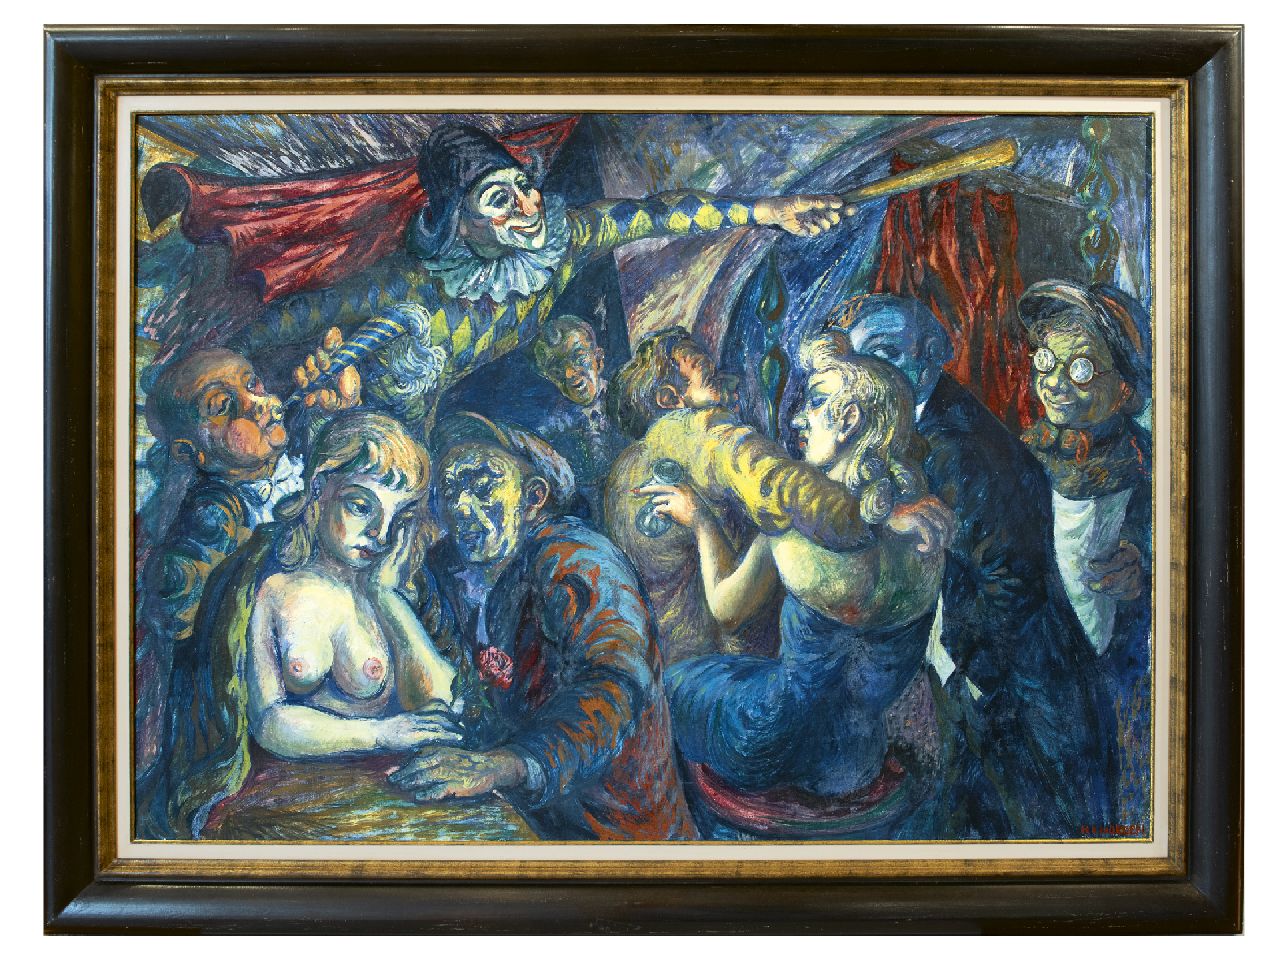 Norden H. van | Hans van Norden | Paintings offered for sale | Carnival, oil on canvas 95.2 x 135.2 cm, signed l.r. and painted ca. 1951